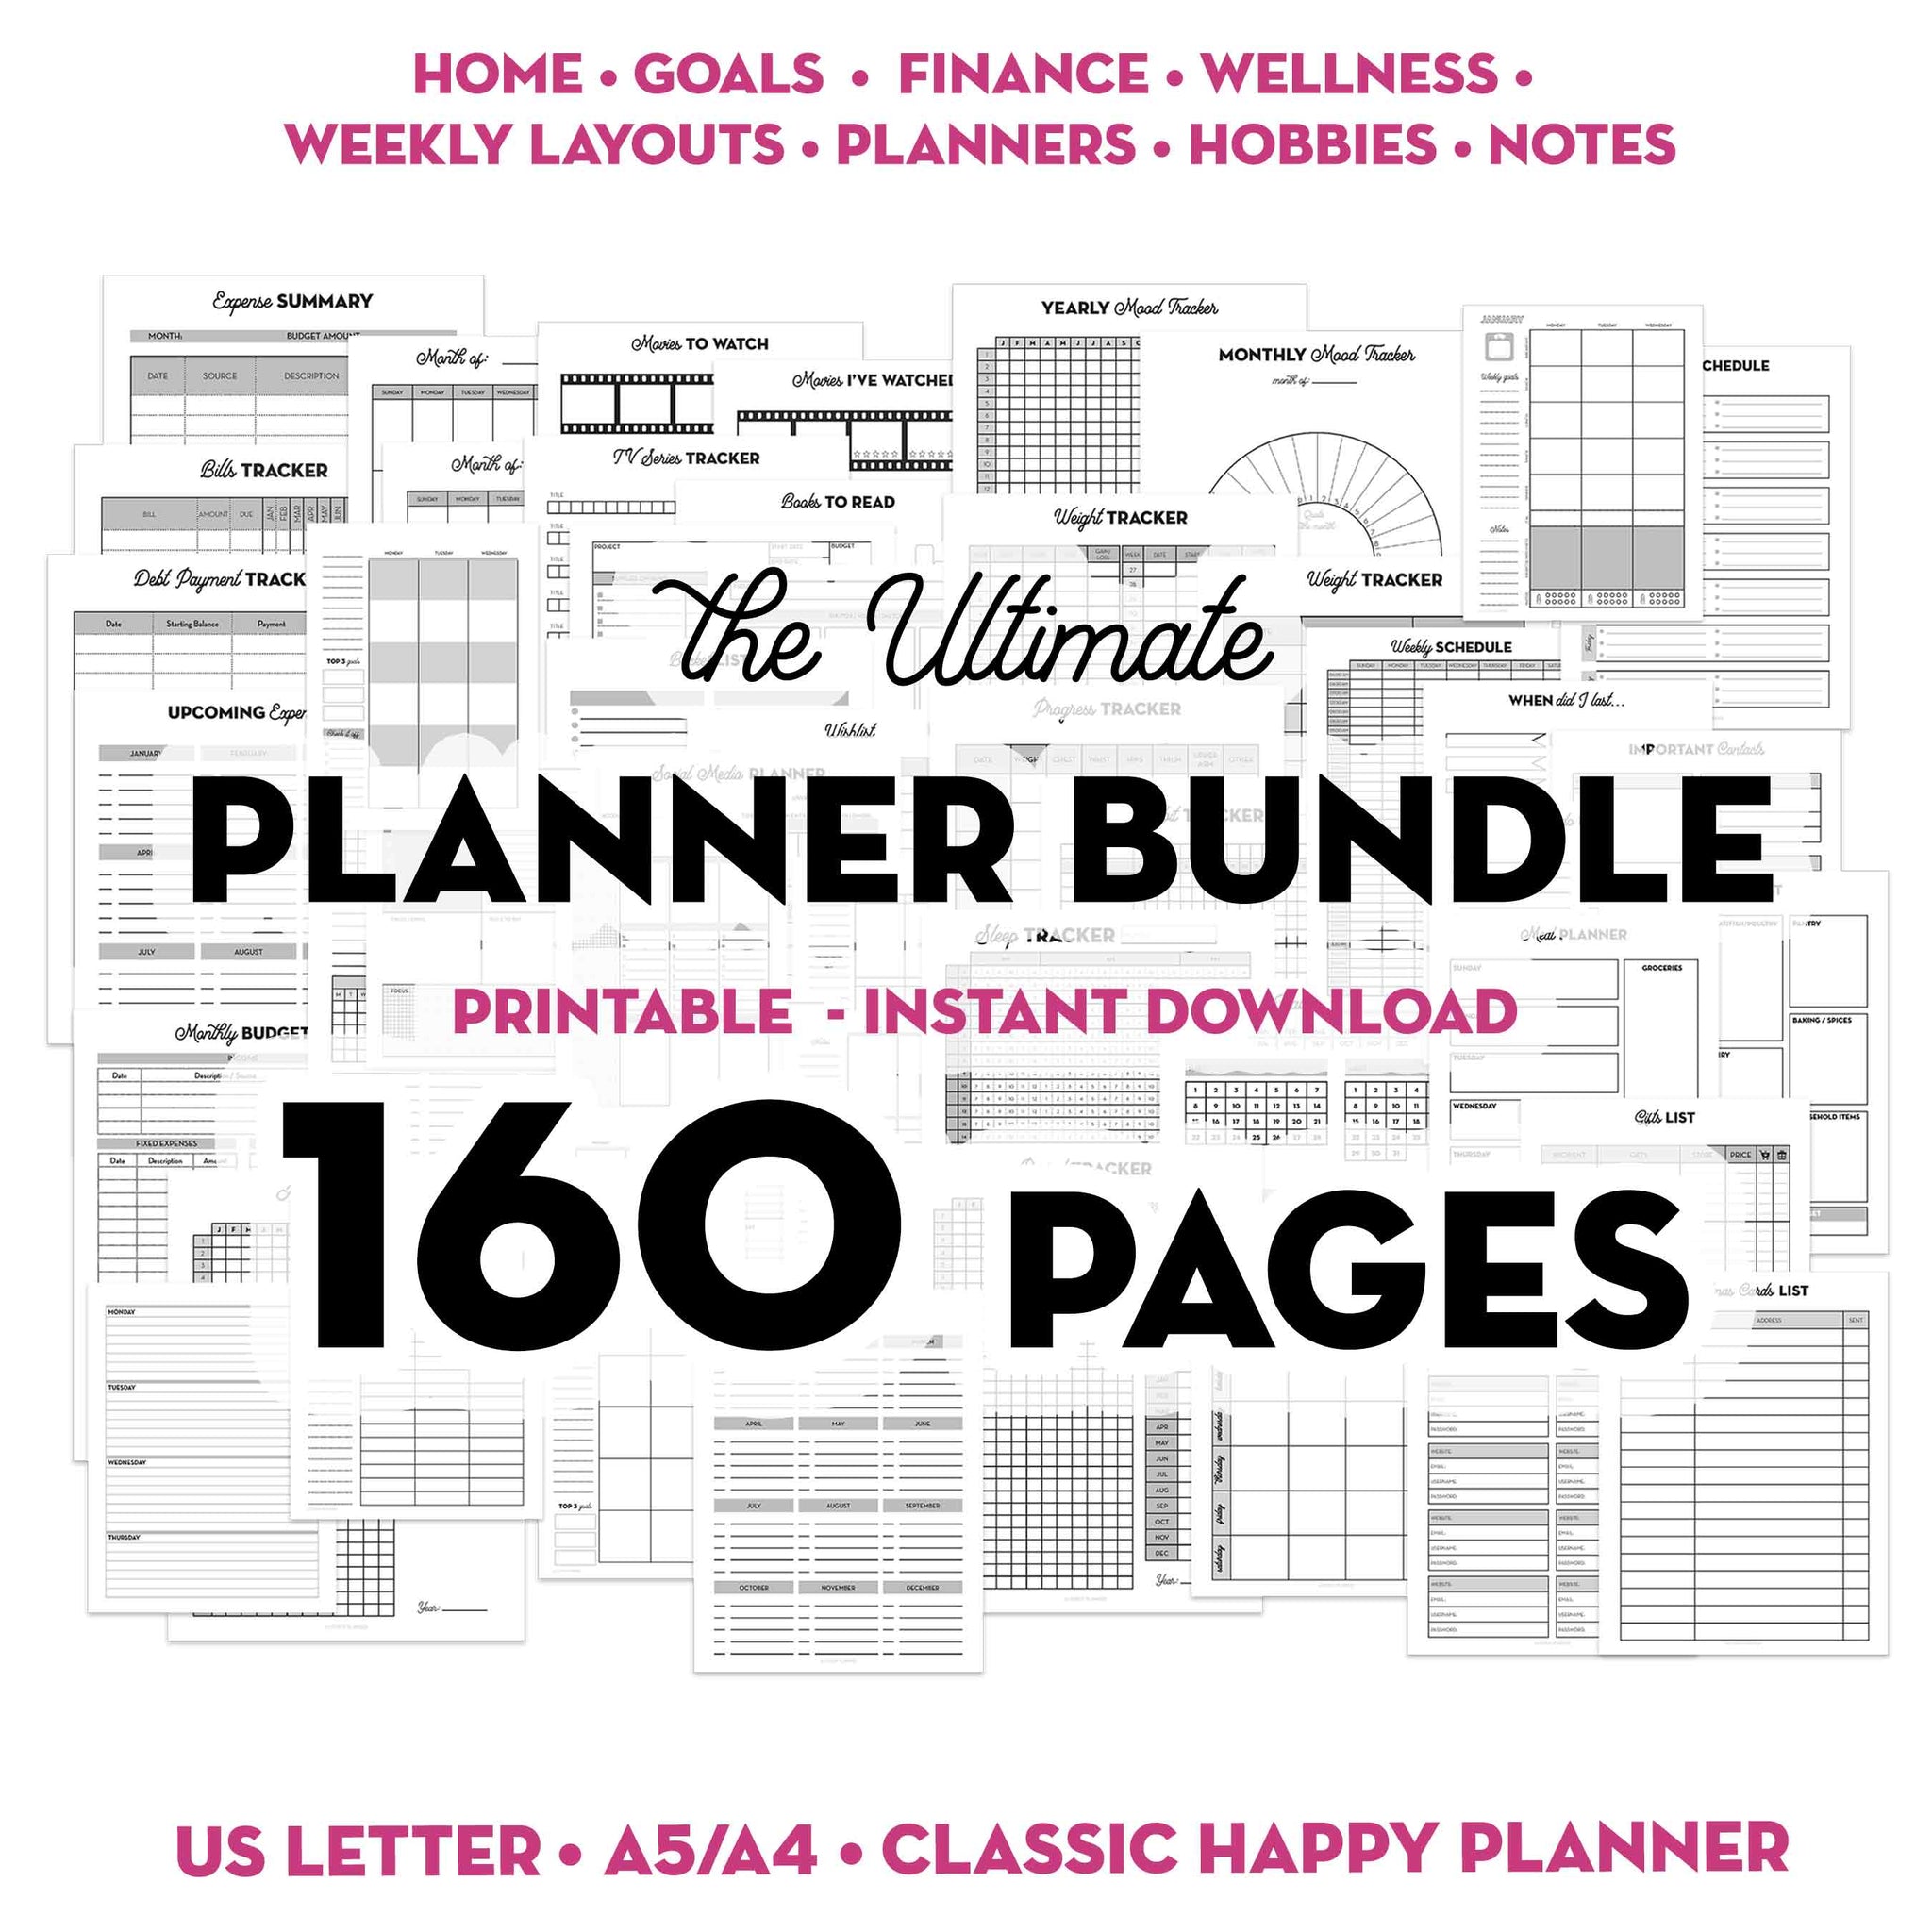 Daily Planner – Printable Insert (A5) – Free PDF Download, Two Page Layout